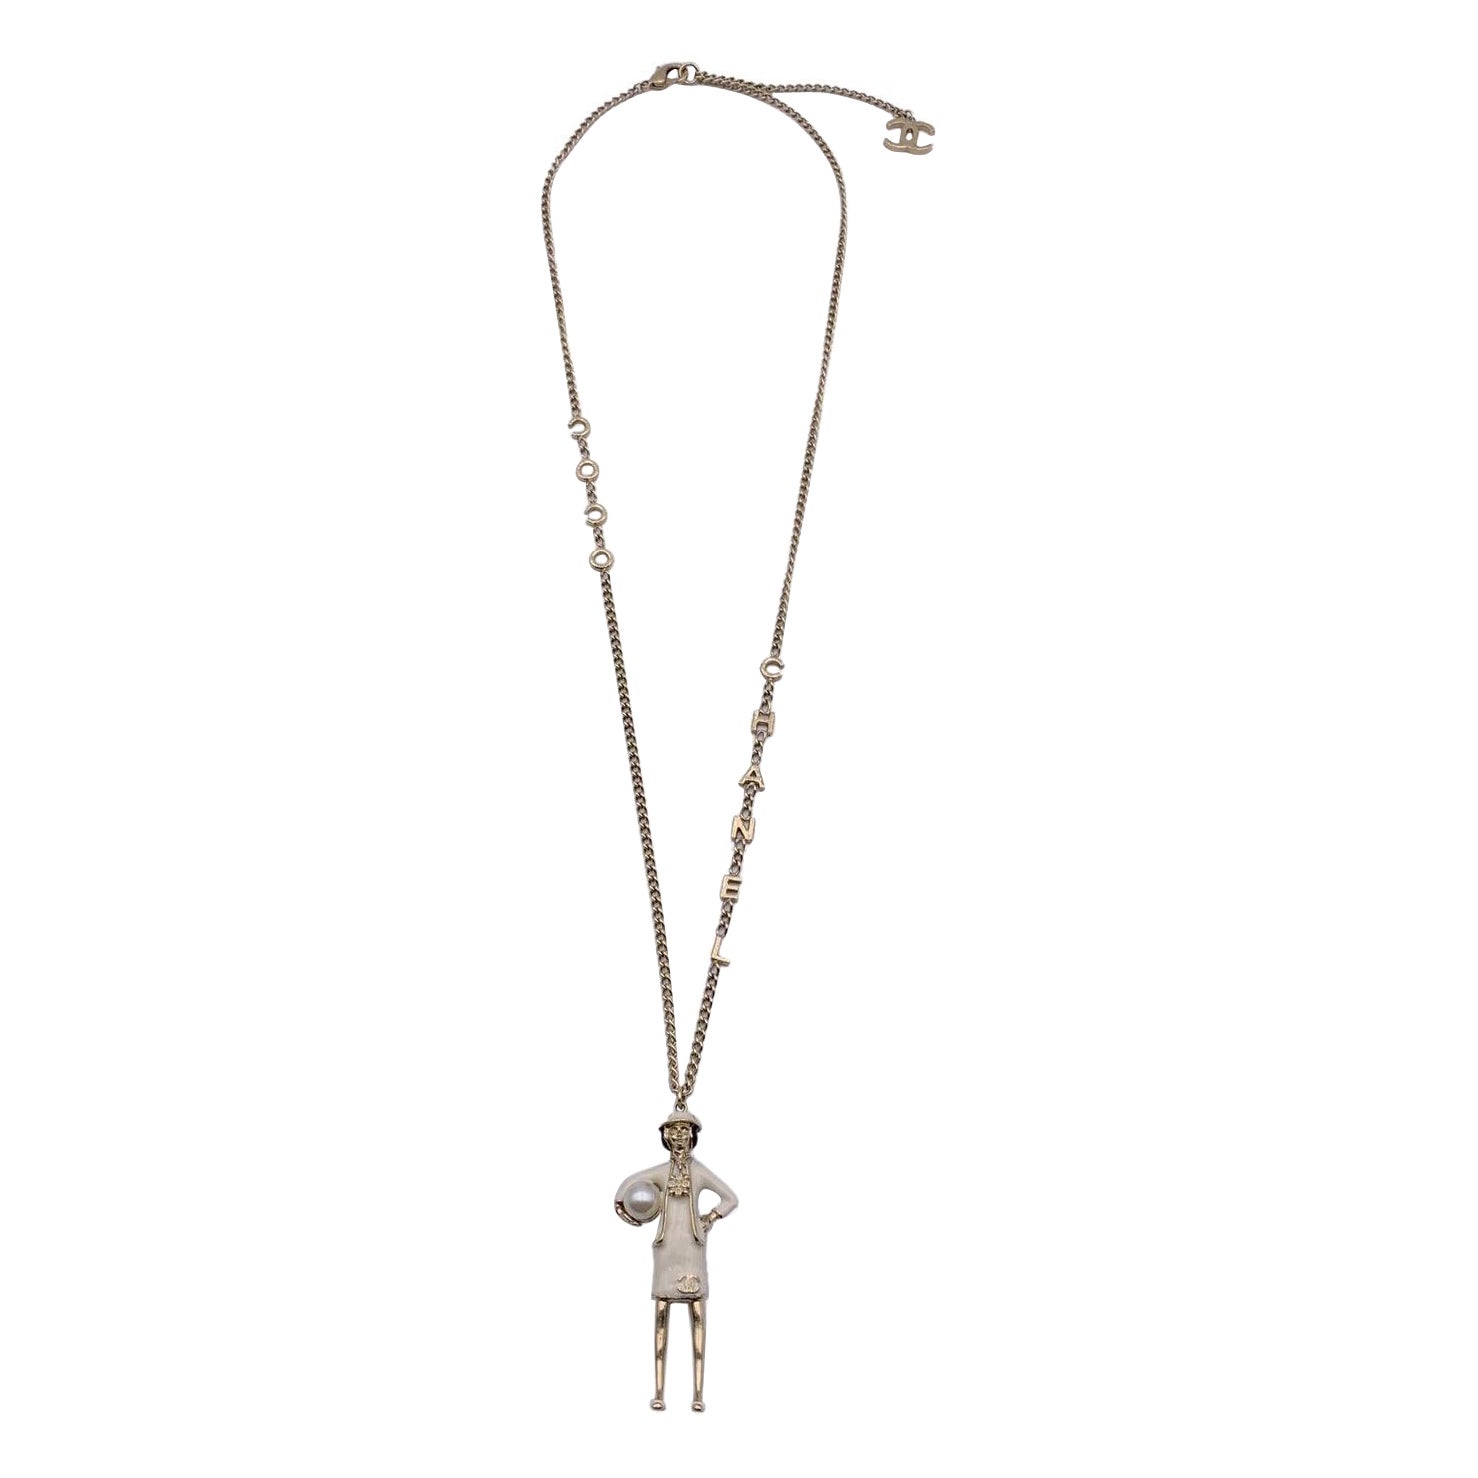 Chanel Light Gold Metal Coco Mademoiselle Figurine Pendant Necklace